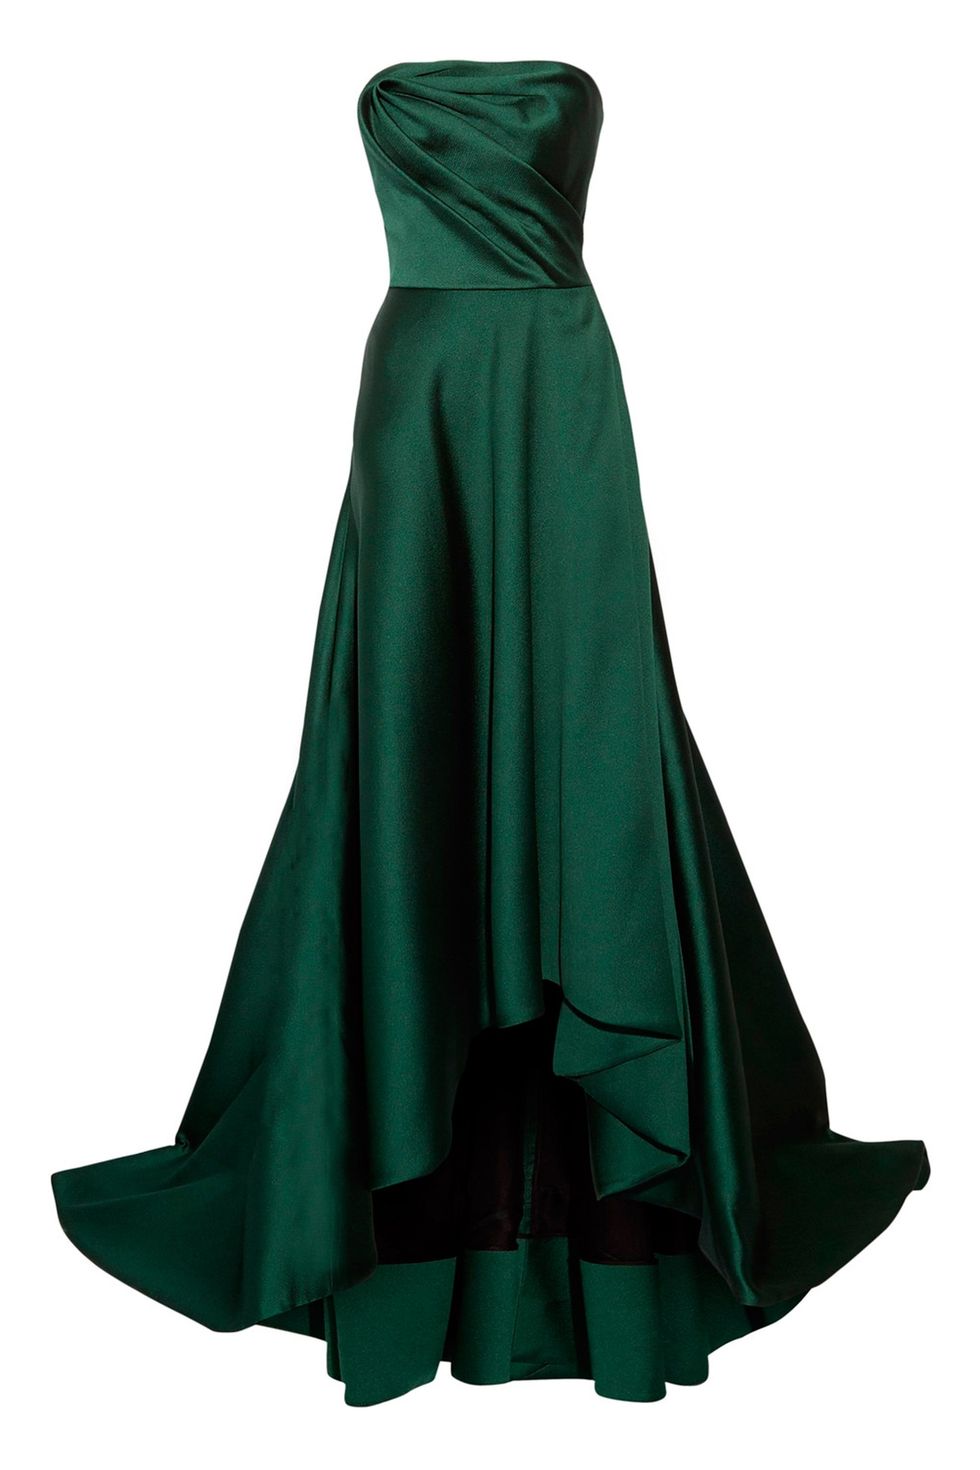 Clothing, Dress, Green, Gown, Strapless dress, Shoulder, Day dress, Formal wear, Bridal party dress, A-line, 